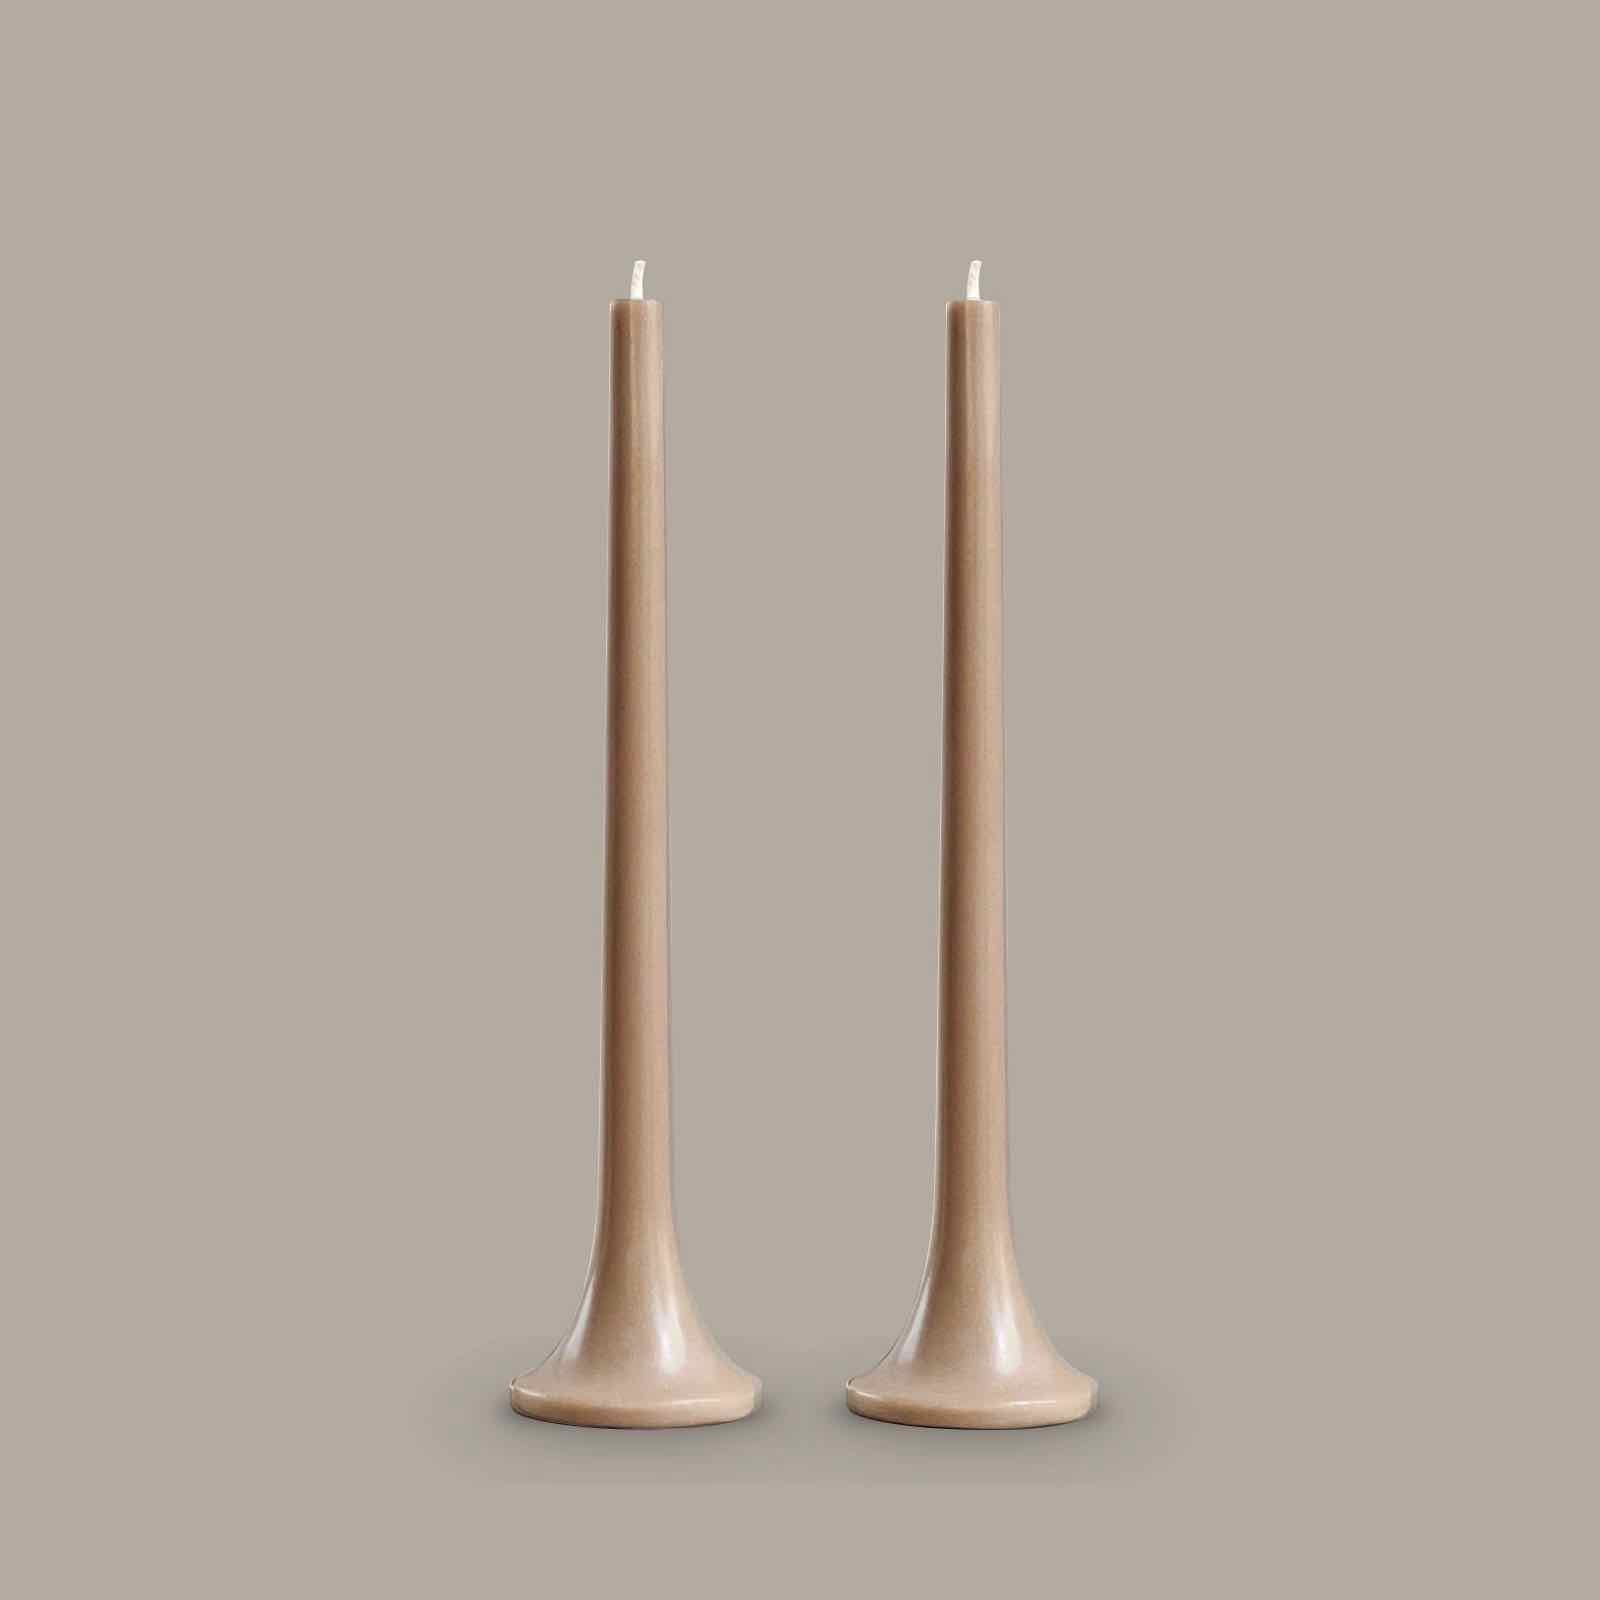 Neutral brown taper candles